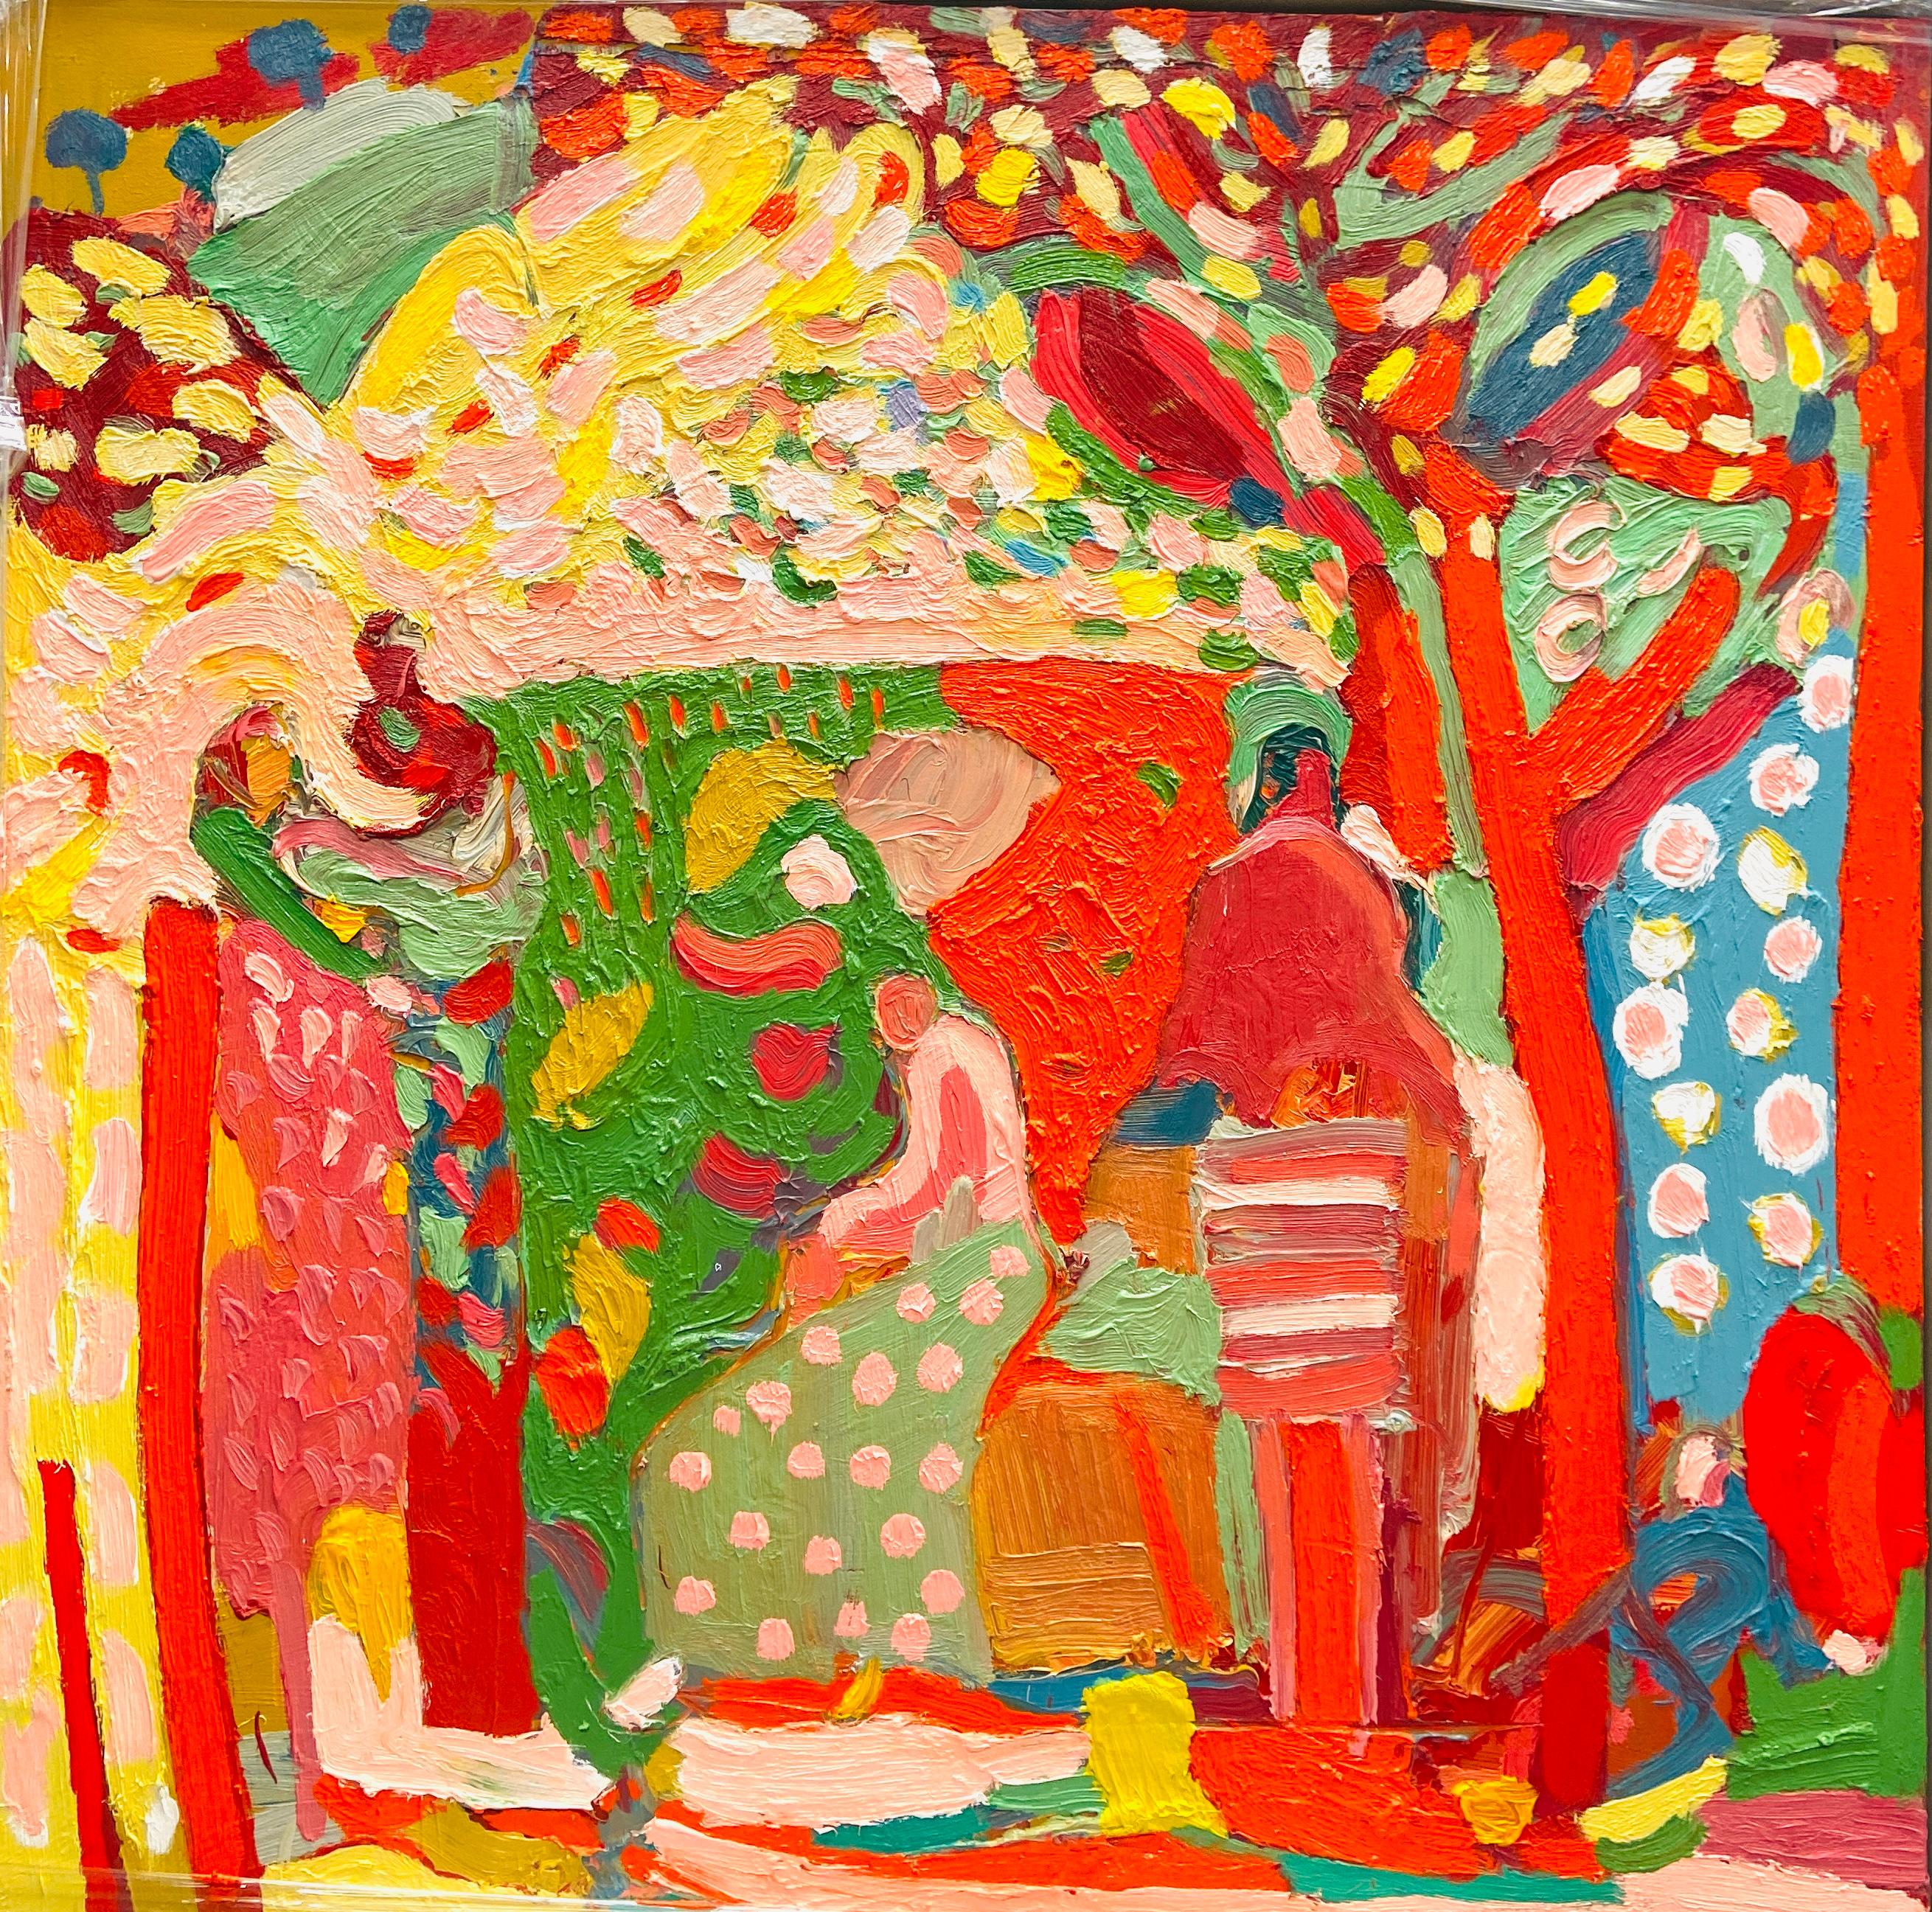 Rajisthan Garden: Contemporary Abstract Expressionist Oil Painting - Orange Figurative Painting by Paul wadsworth